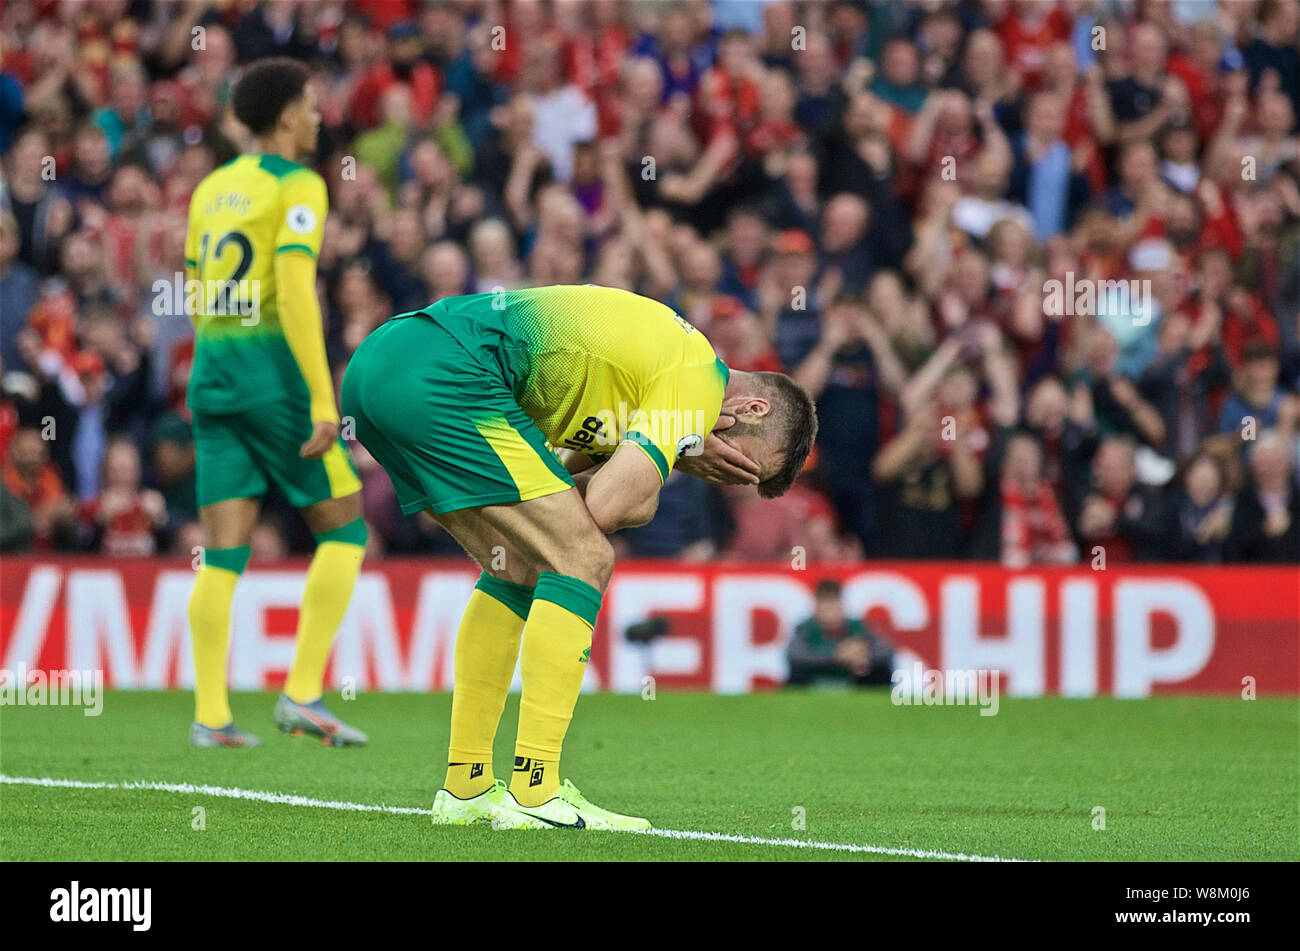 Liverpool, UK. 9th Aug, 2019. Norwich City's Grant Hanley reacts during the English Premier League match between Liverpool and Norwich City at Anfield in Liverpool, Britain on Aug. 9, 2019. Liverpool won 4-1. Credit: Xinhua/Alamy Live News Stock Photo